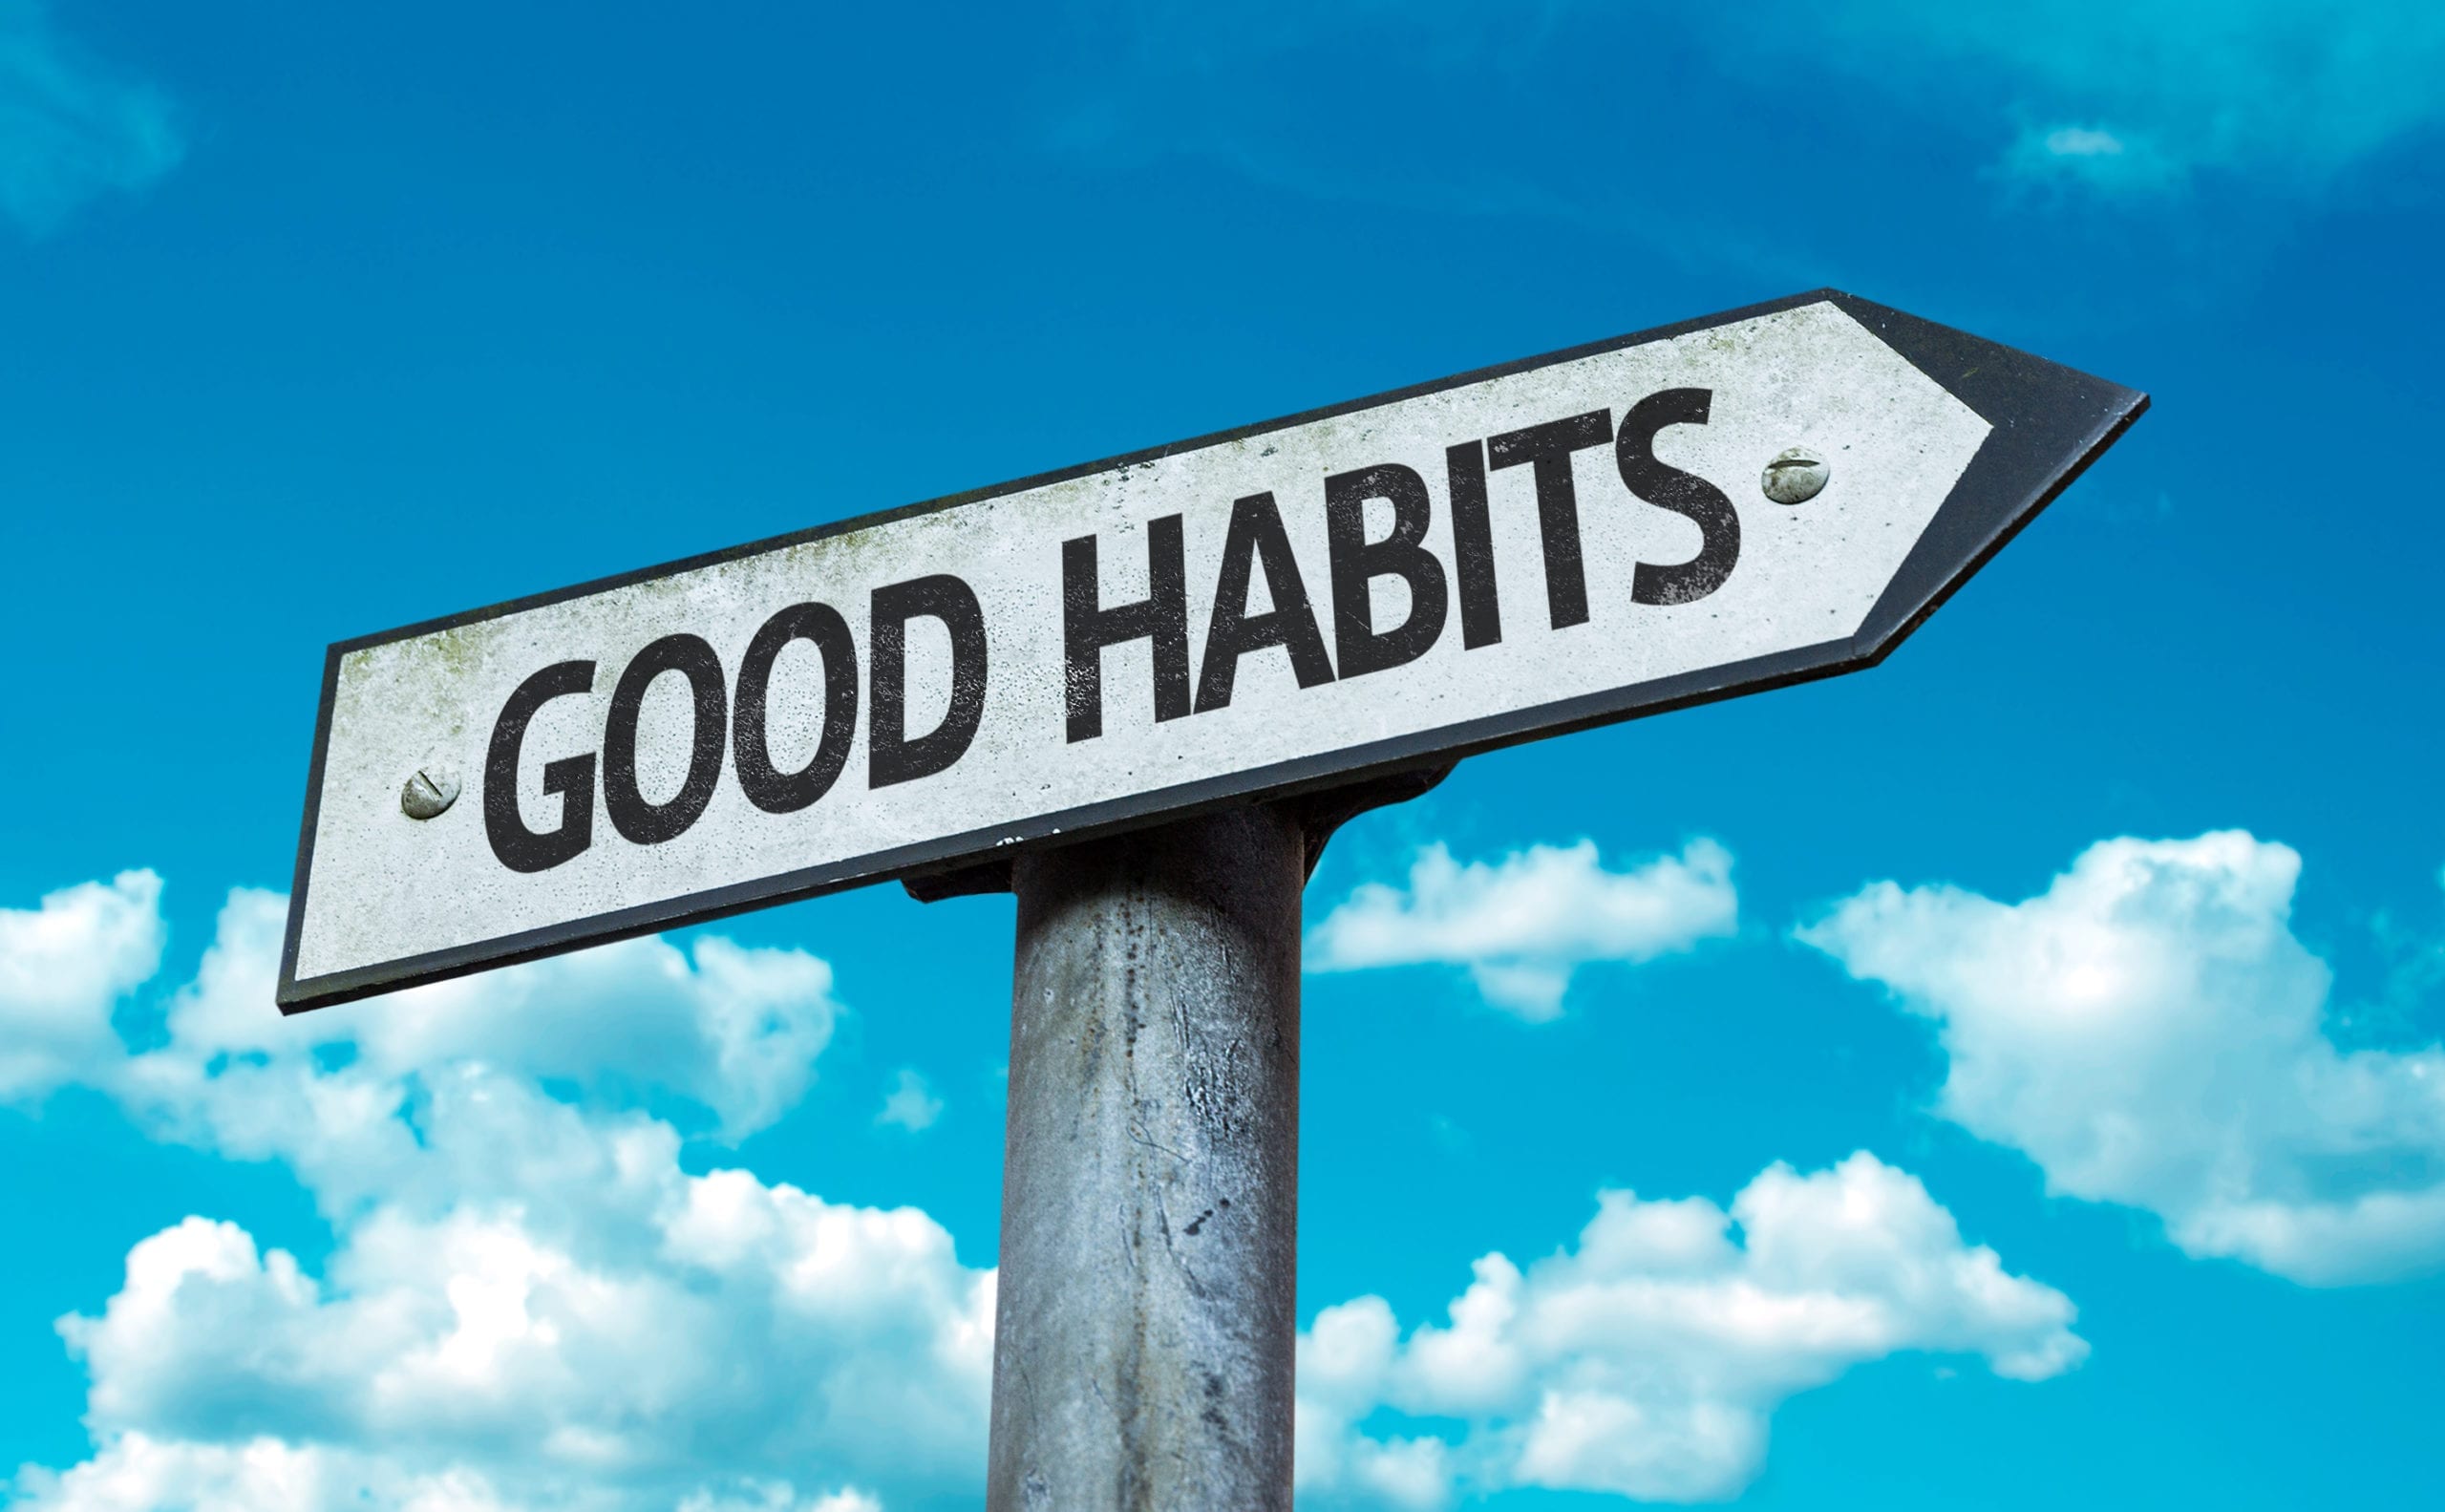 Good habits can transform your career and sales.